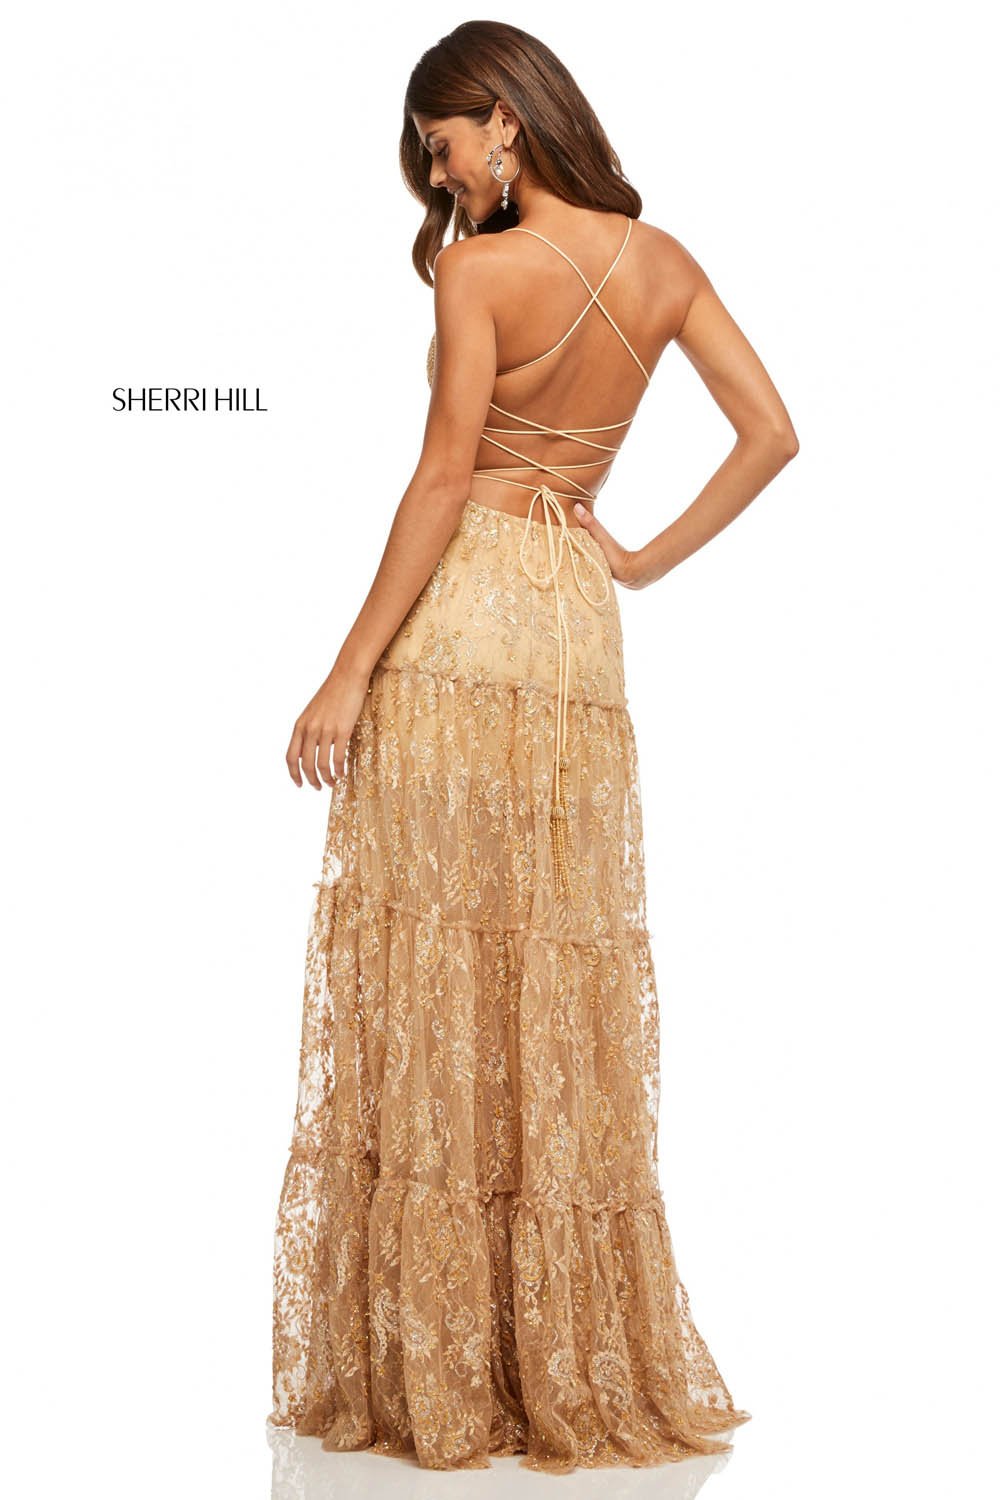 Sherri Hill 52675 dress images in these colors: Gold.